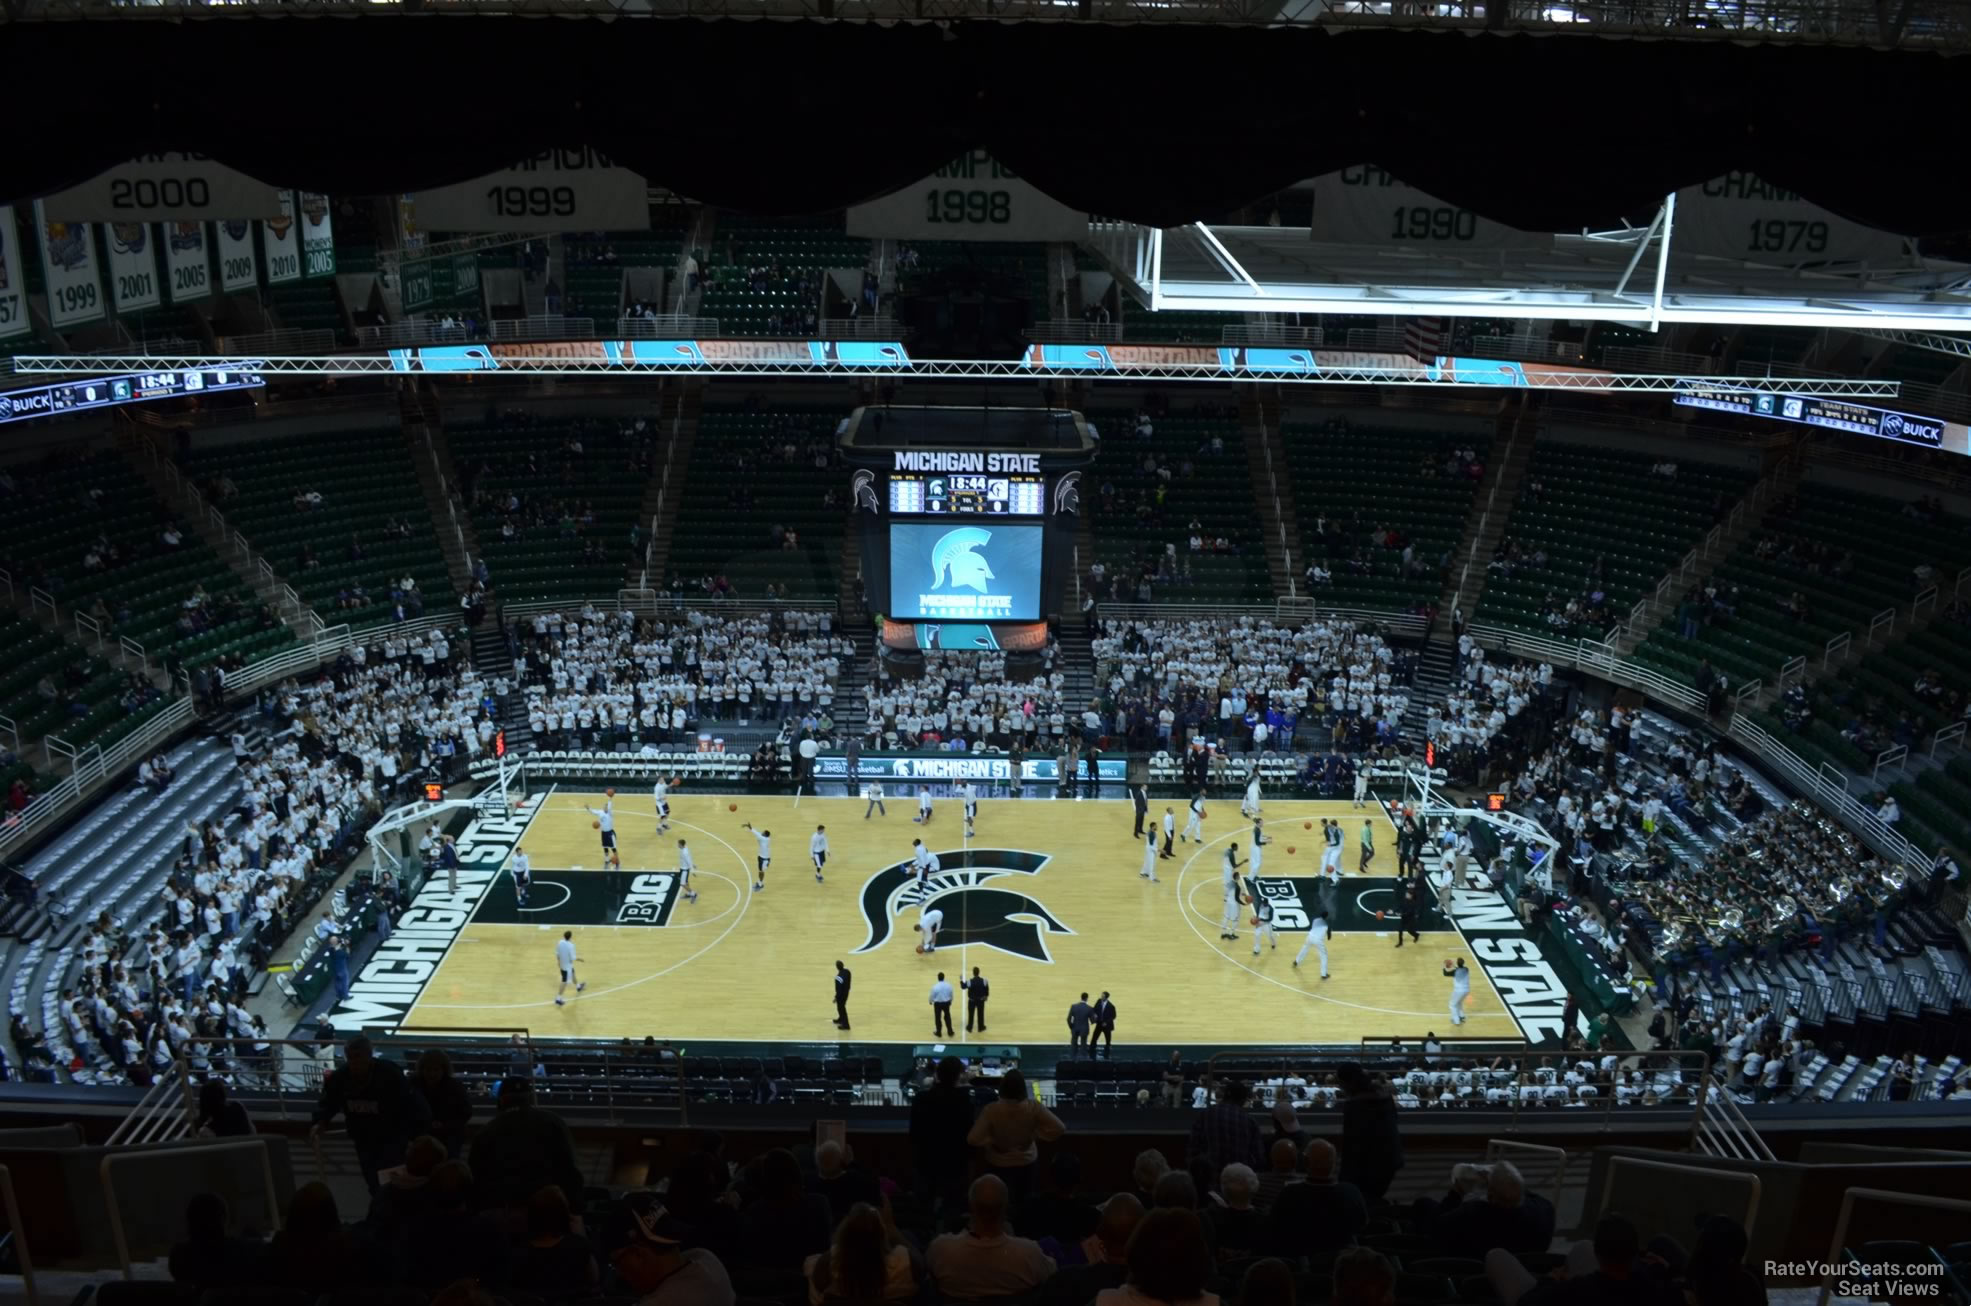 section 227, row 15 seat view  - breslin center